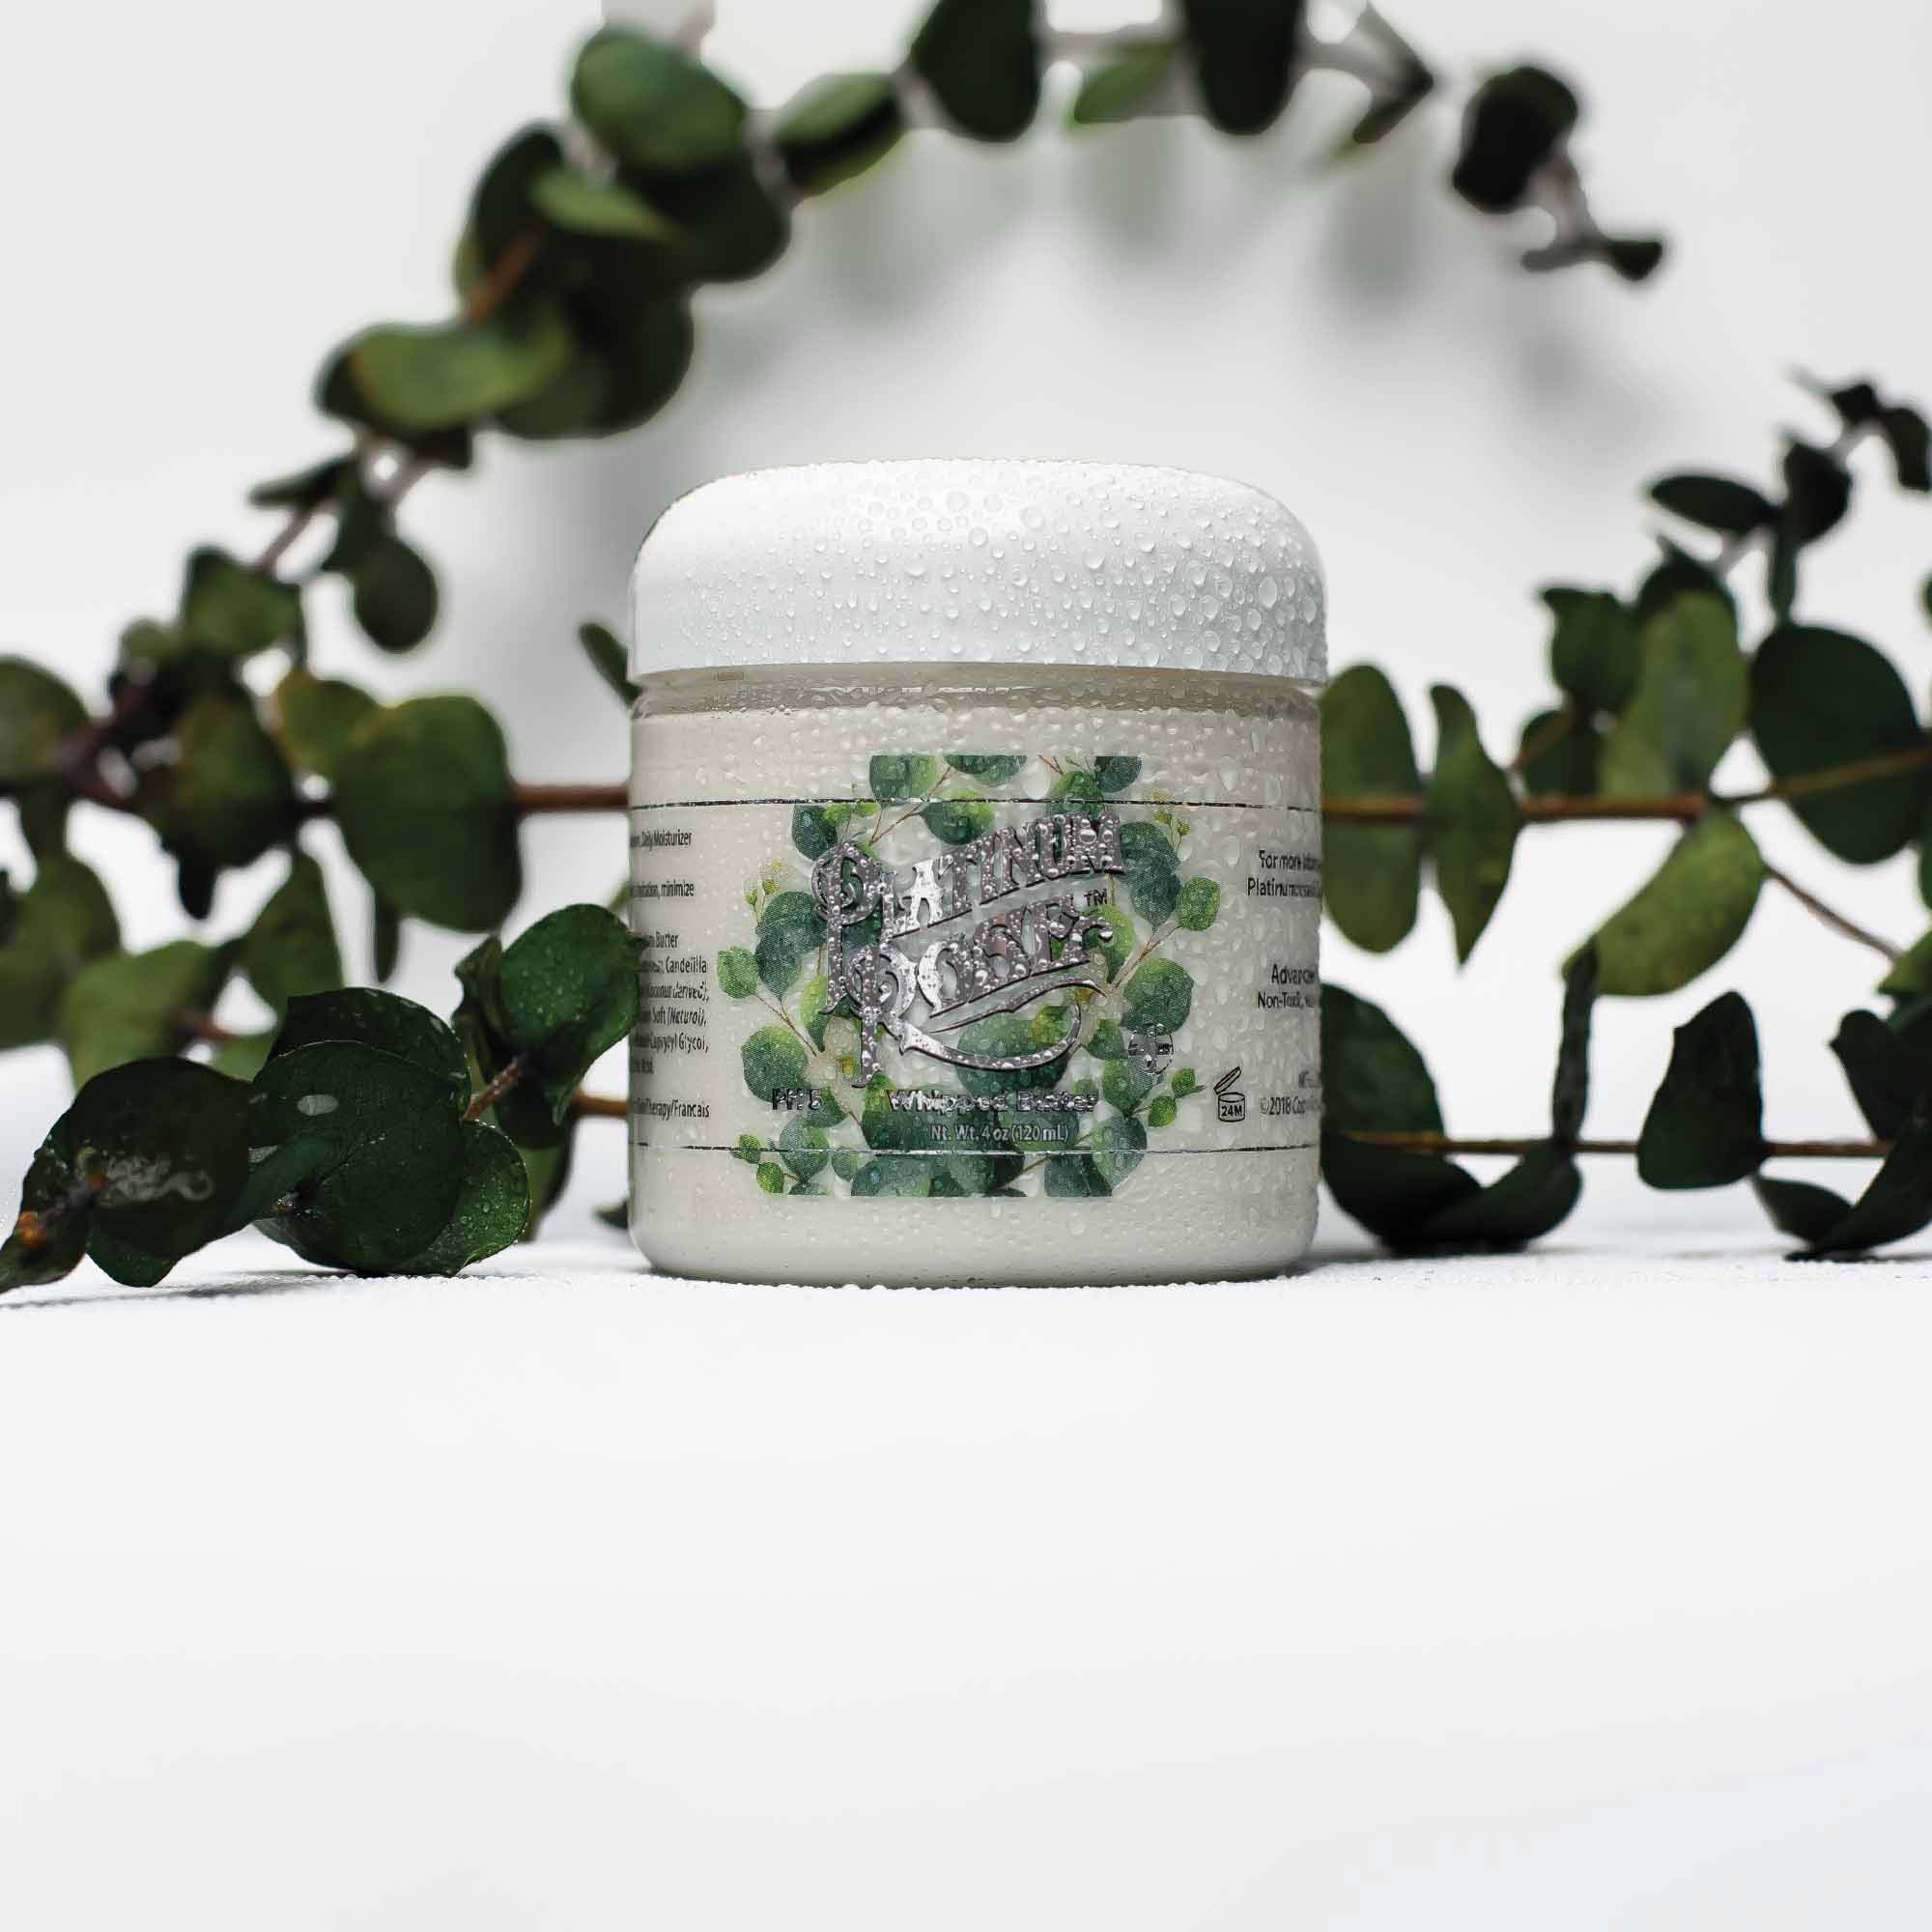 2oz jar of Platinum Rose tattoo Aftercare eucalyptus whipped butter surrounded by freshly cut eucalyptus leaves.